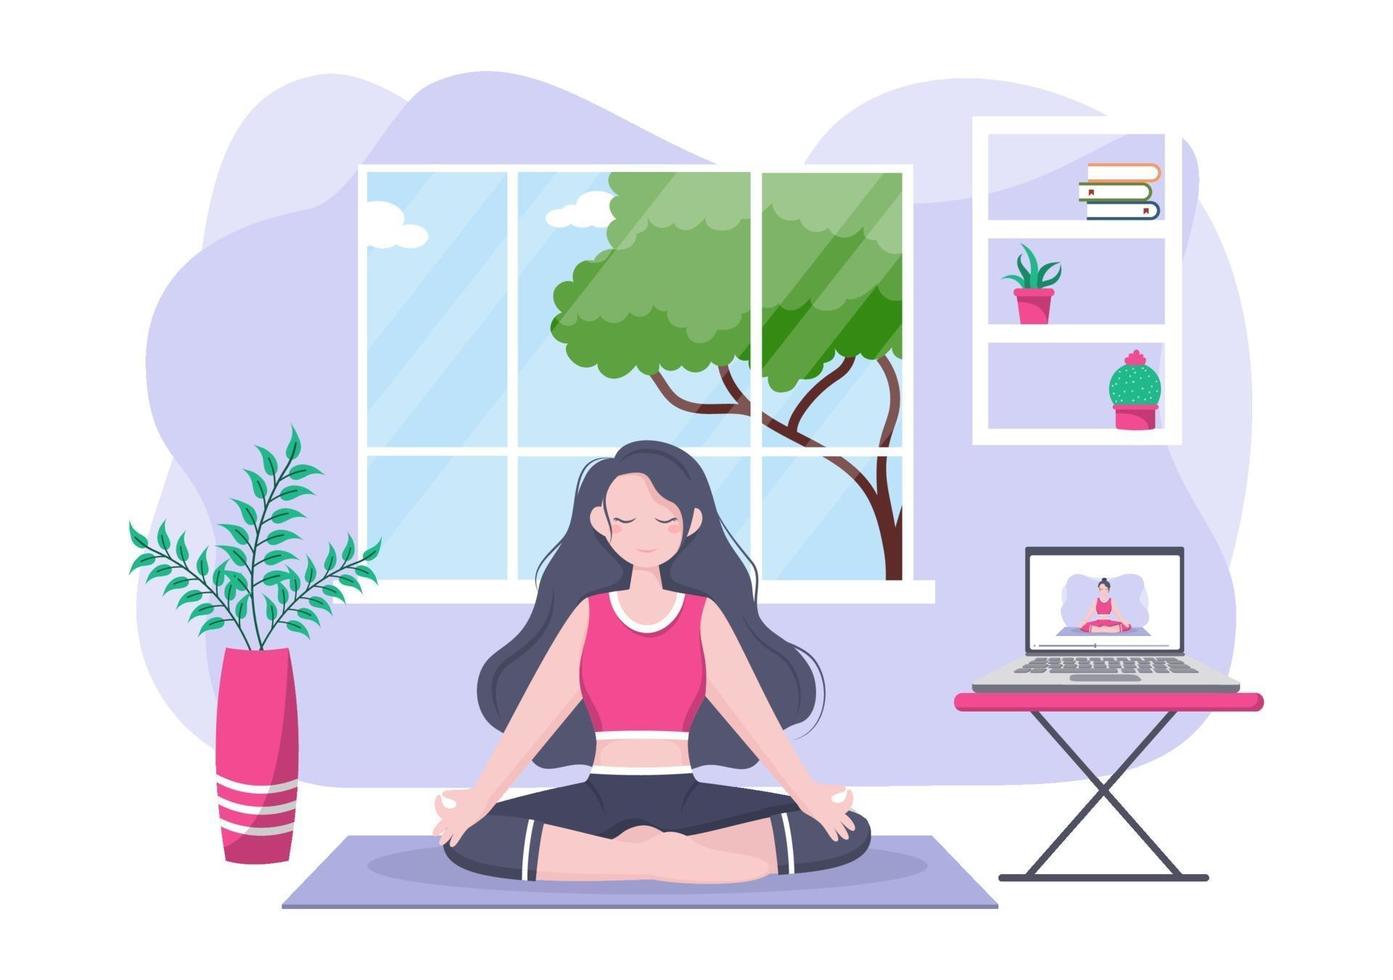 Online Lessons, Yoga and Meditation Classes Concept vector